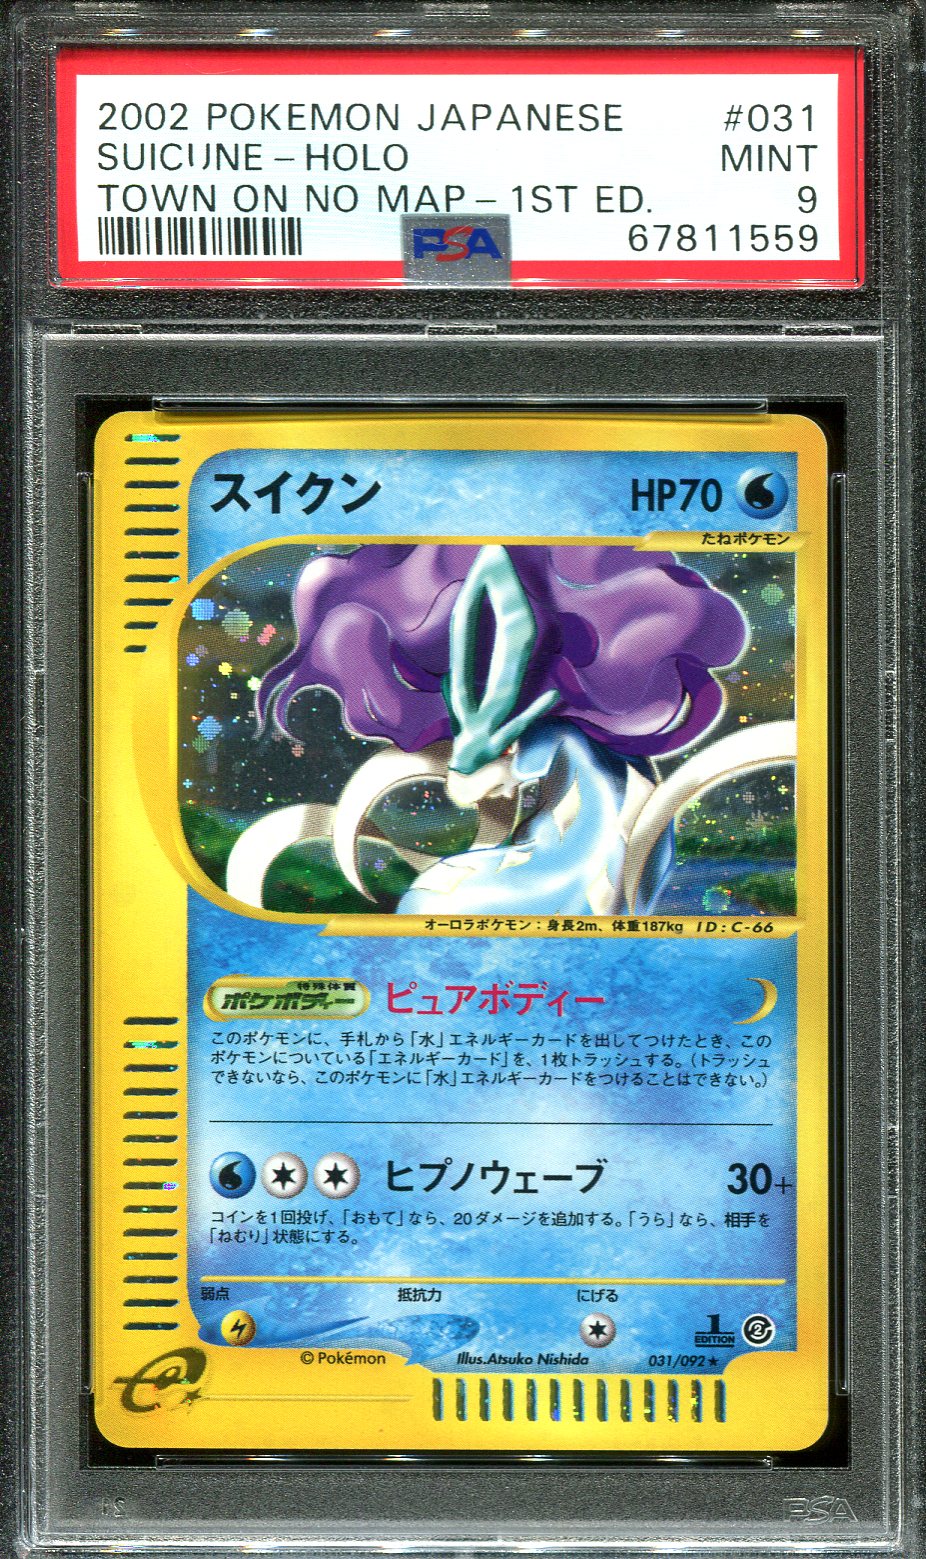 SUICUNE 031/092 PSA 9 POKEMON TOWN ON NO MAP JAPANESE